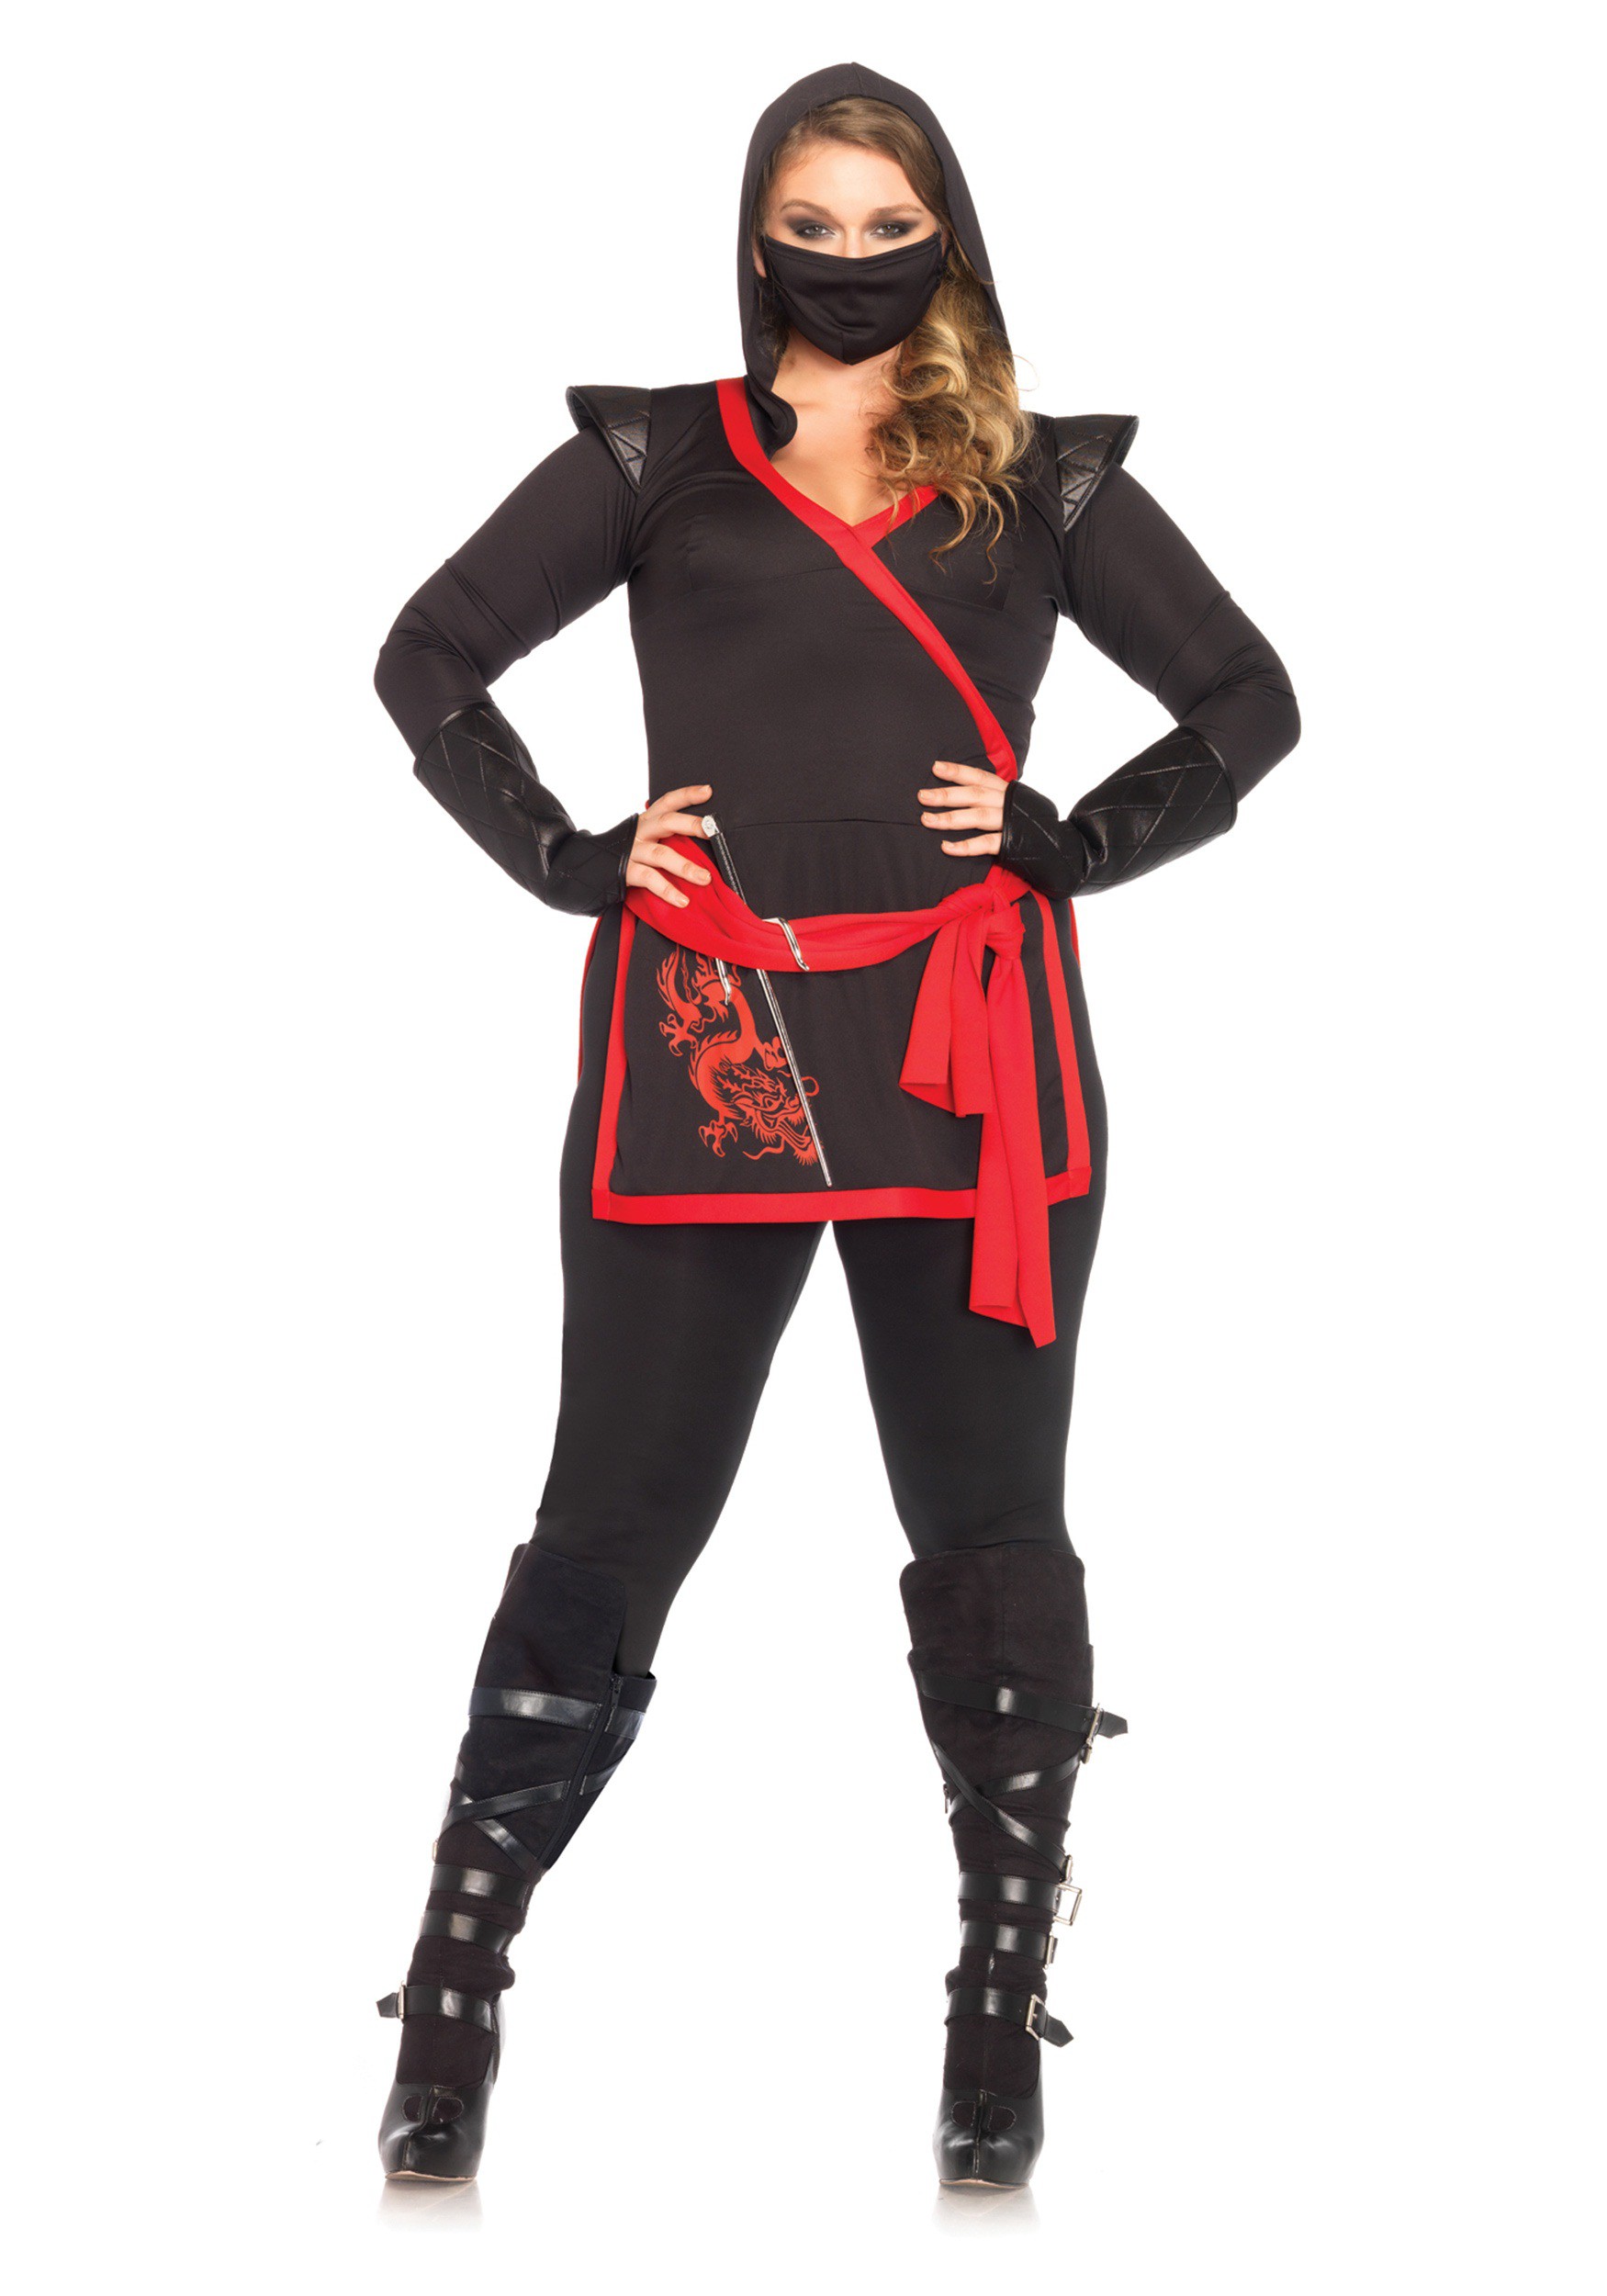 https://images.fun.com/products/32490/1-1/plus-size-ninja-assassin-costume-for-women.jpg